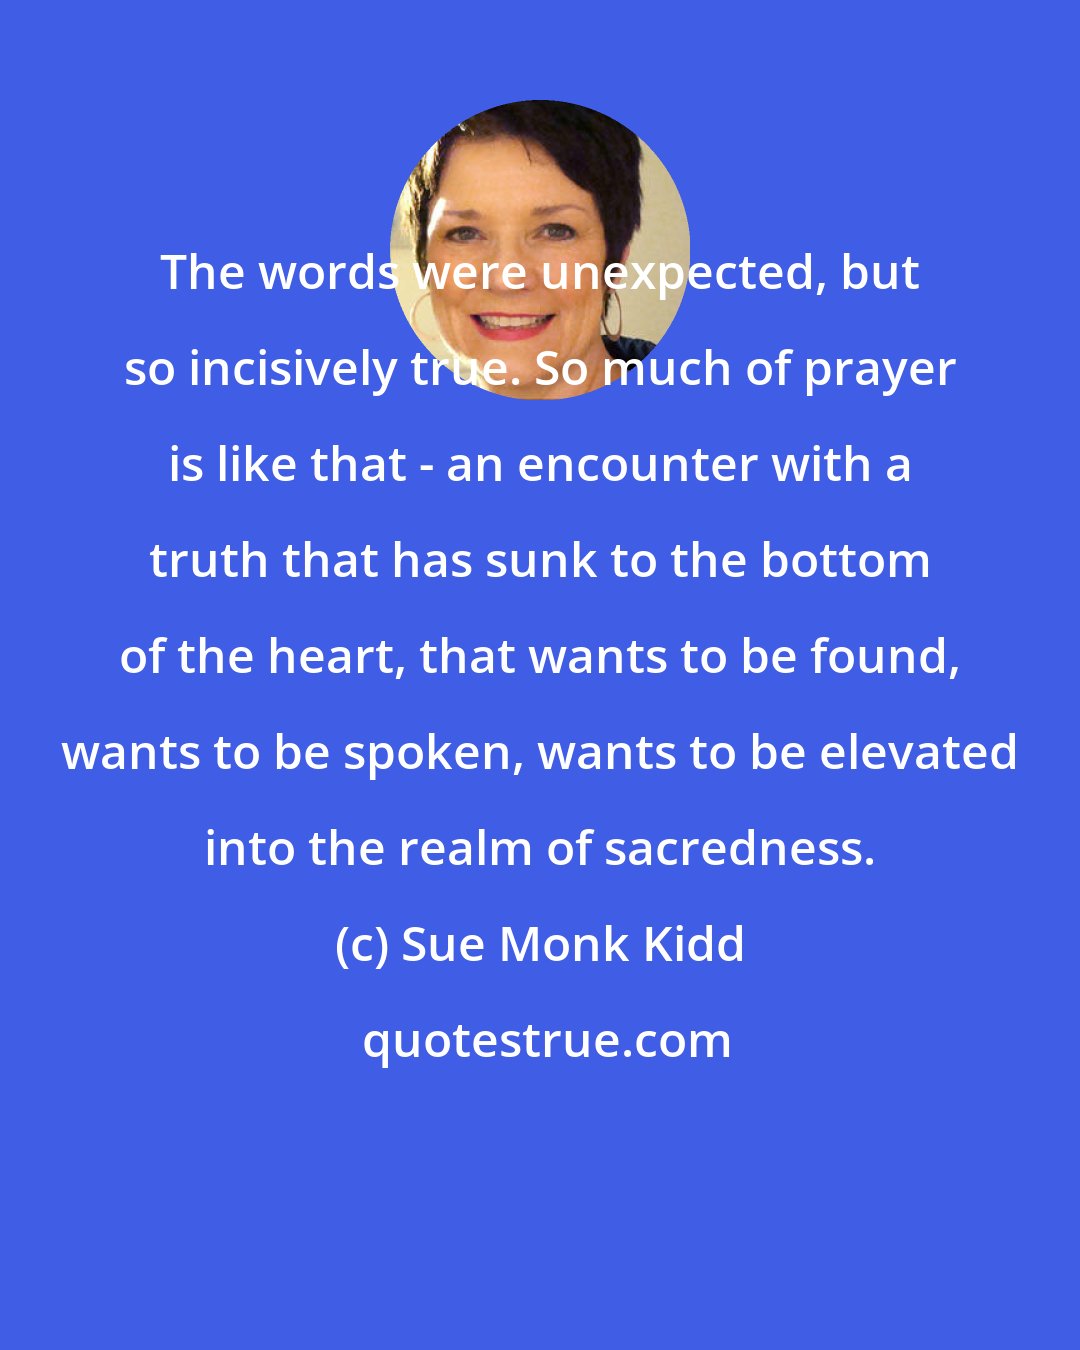 Sue Monk Kidd: The words were unexpected, but so incisively true. So much of prayer is like that - an encounter with a truth that has sunk to the bottom of the heart, that wants to be found, wants to be spoken, wants to be elevated into the realm of sacredness.